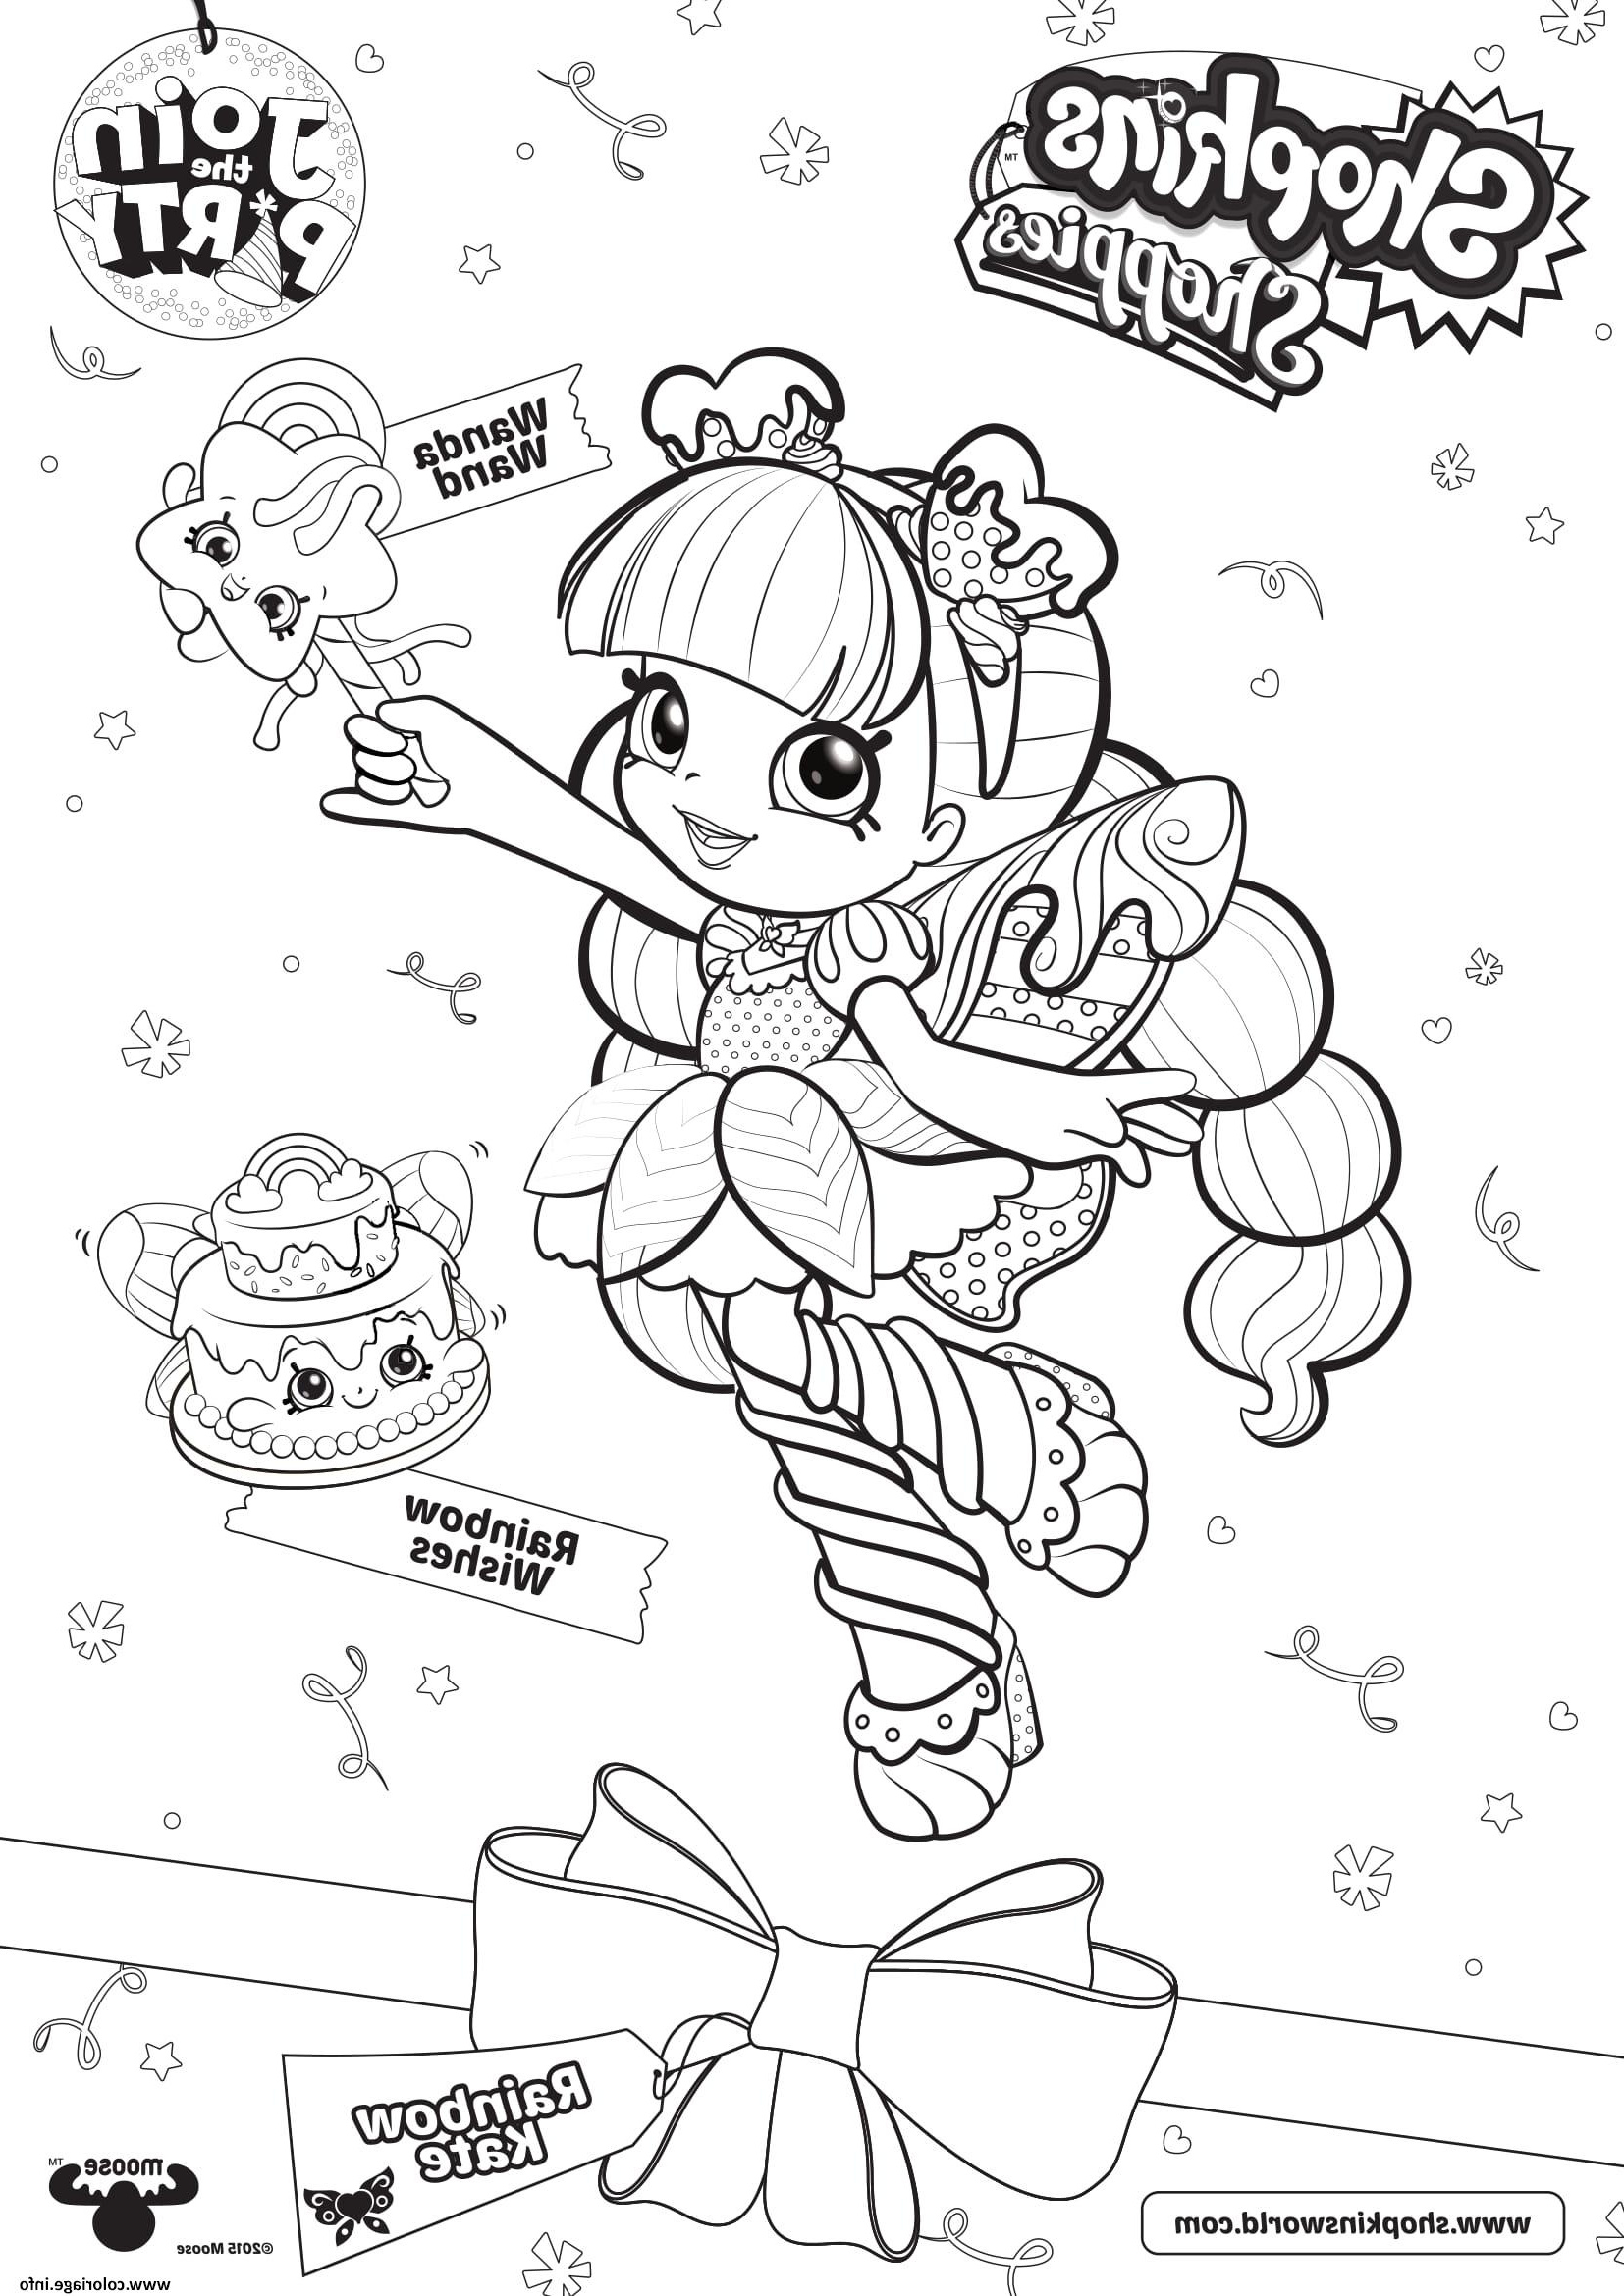 Dessin A Imprimer Shopkins Impressionnant Stock Coloriage Shopkins Shoppies Join the Party Wanda Wand